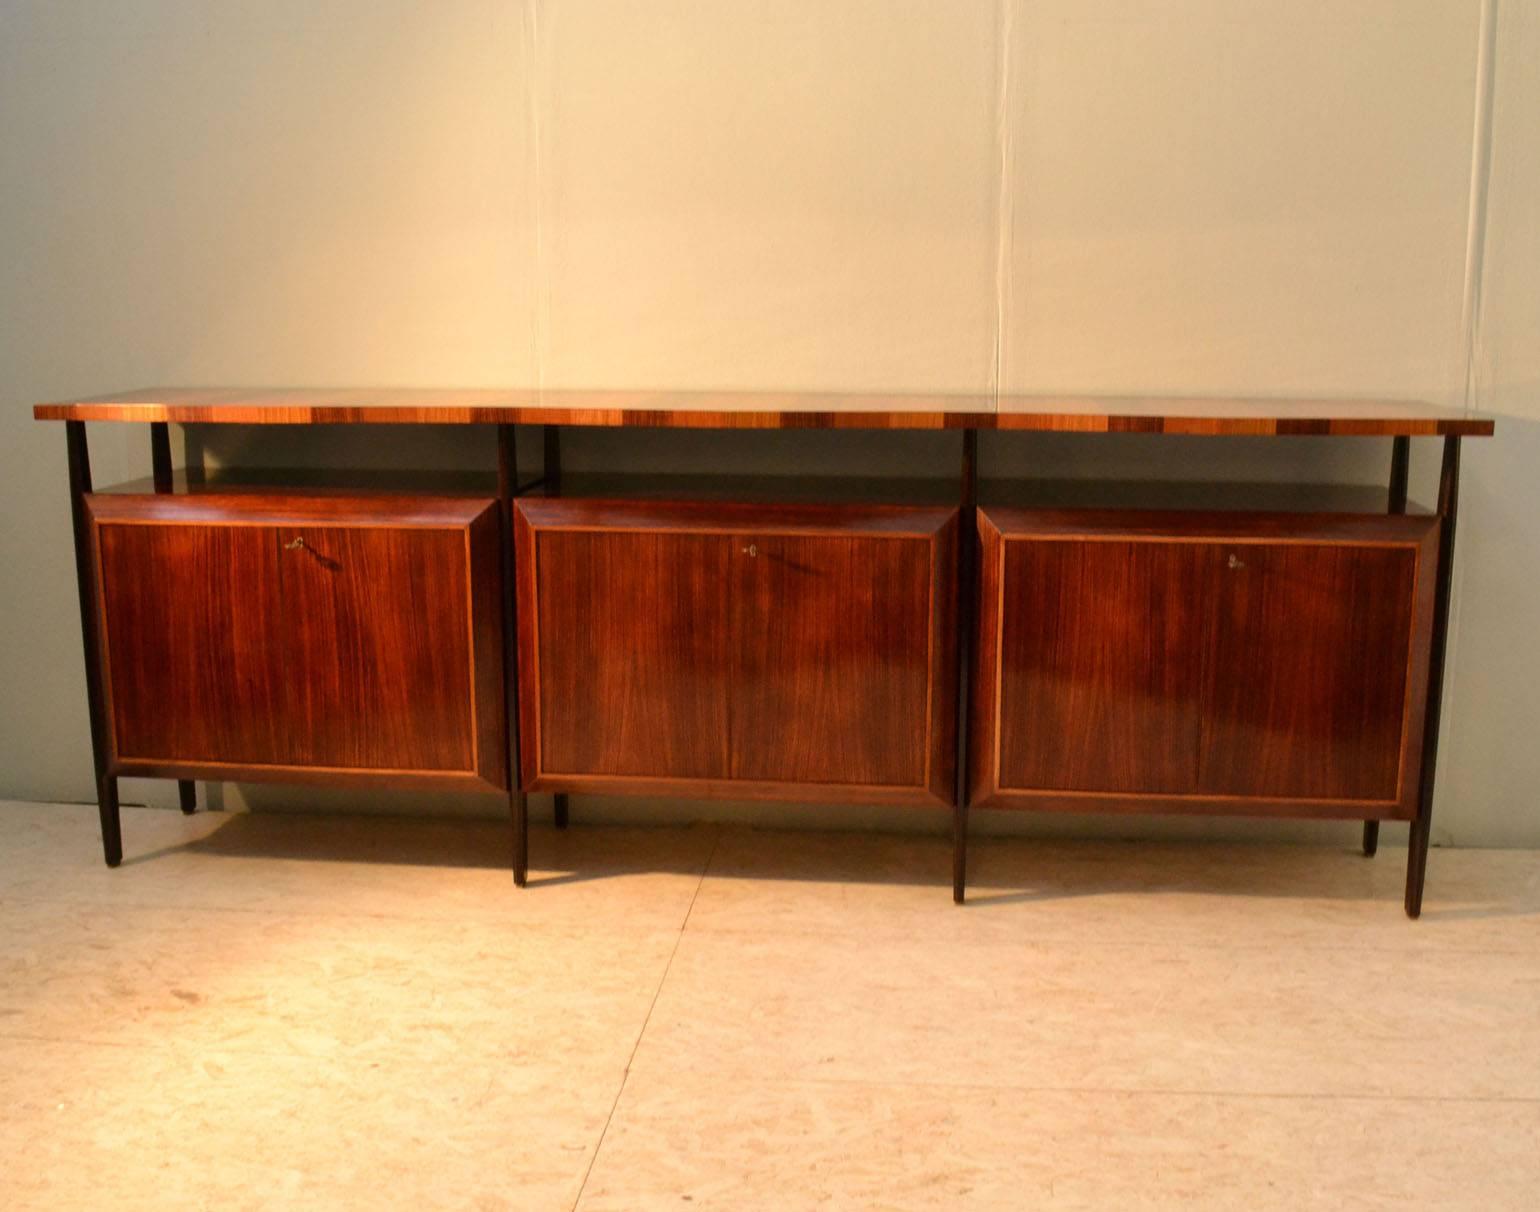 Unusual handcrafted sideboard with three units in palisander veneer with diamond shaped fronts doors, suspended on ebonised legs. An overlapping zig-zag edge top floats on top of the legs in borders of three colored wood; Indian palisander, blond